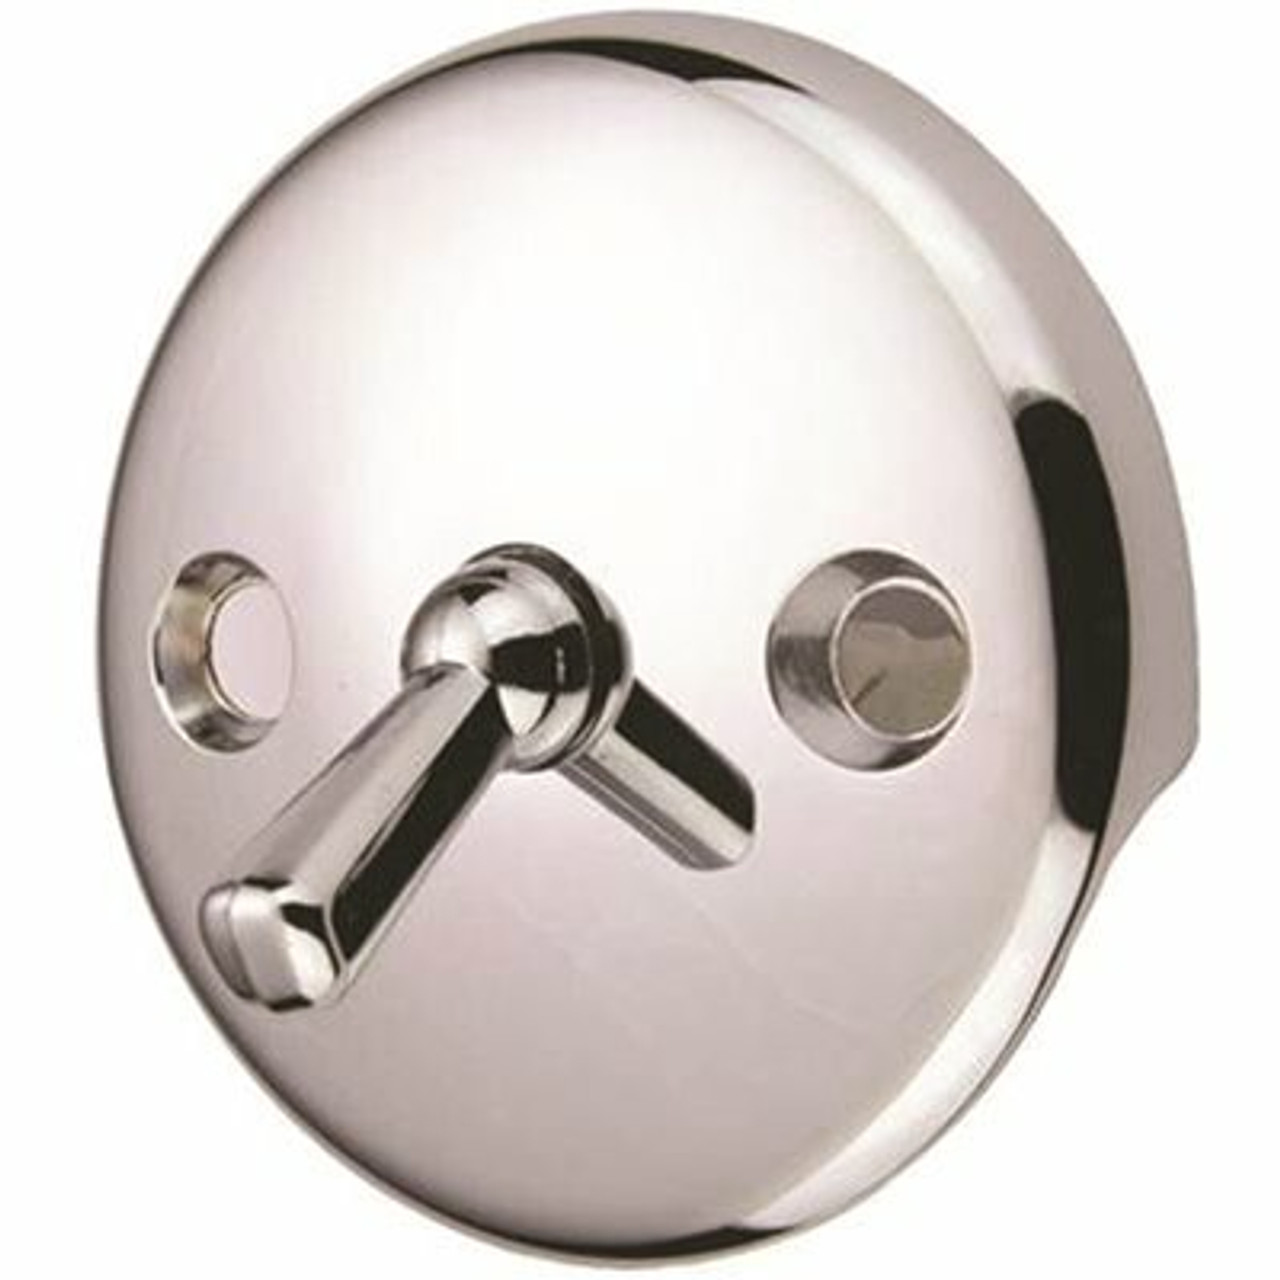 Proplus Bath Drain With Trip Lever Face Plate In Chrome (5-Pack)